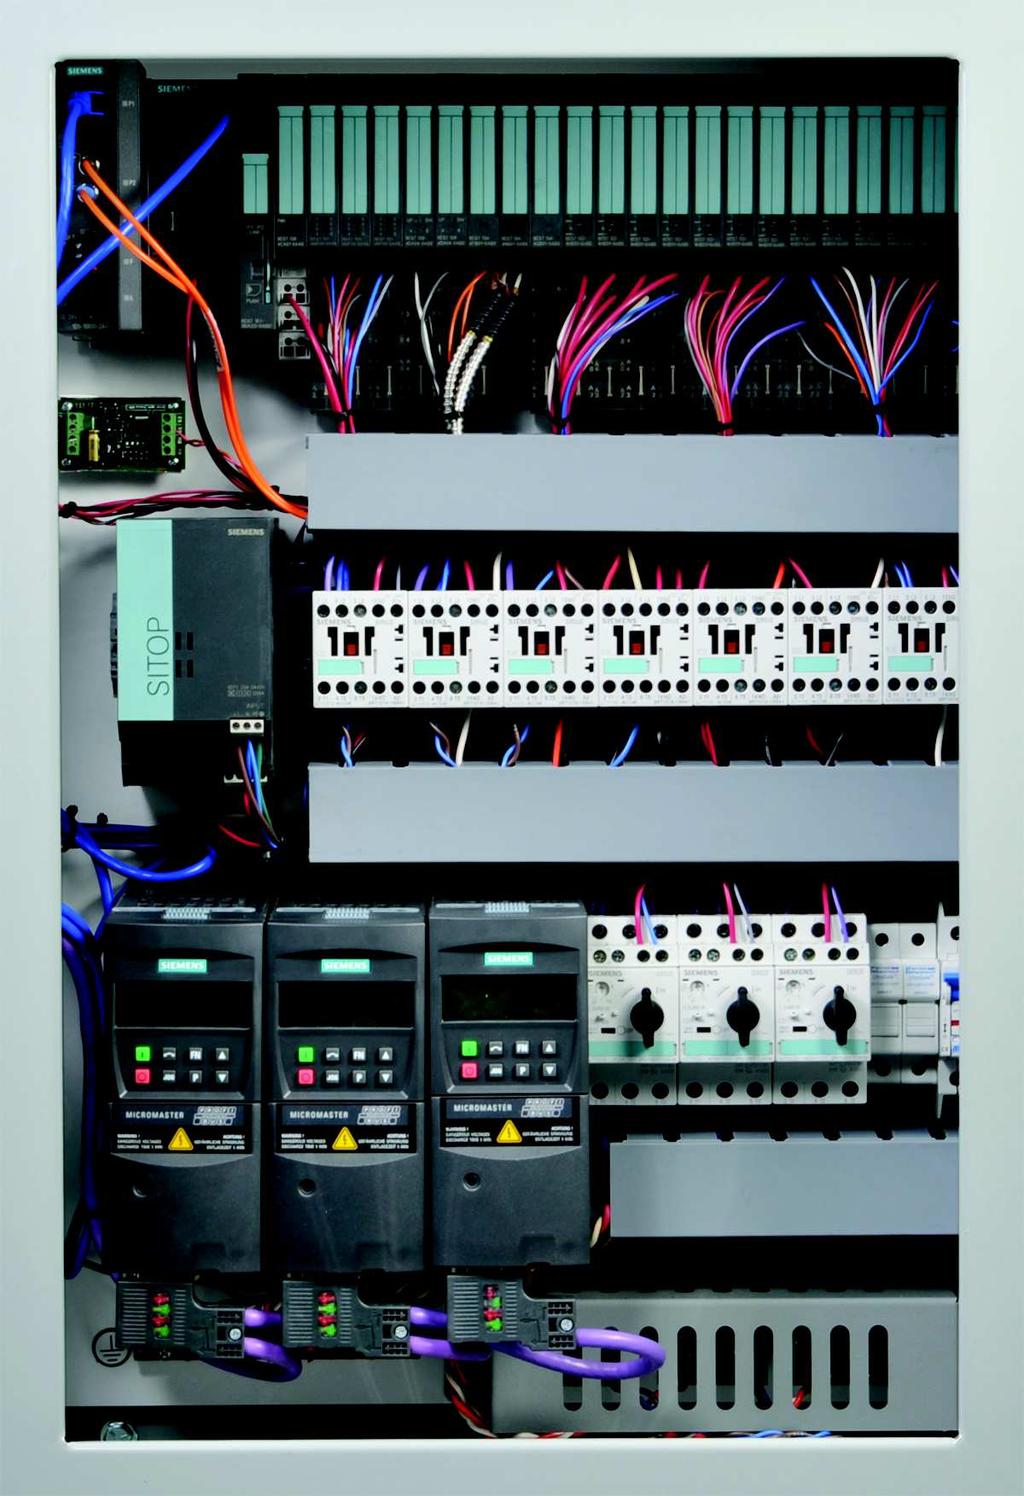 Ex. 5-1 Electrical Circuit and Panel Procedure 5 V dc power supply Breaker overload 24 V dc power supply Distributed I/O power module Relay output AC drive Media converter PWM drive Contactor